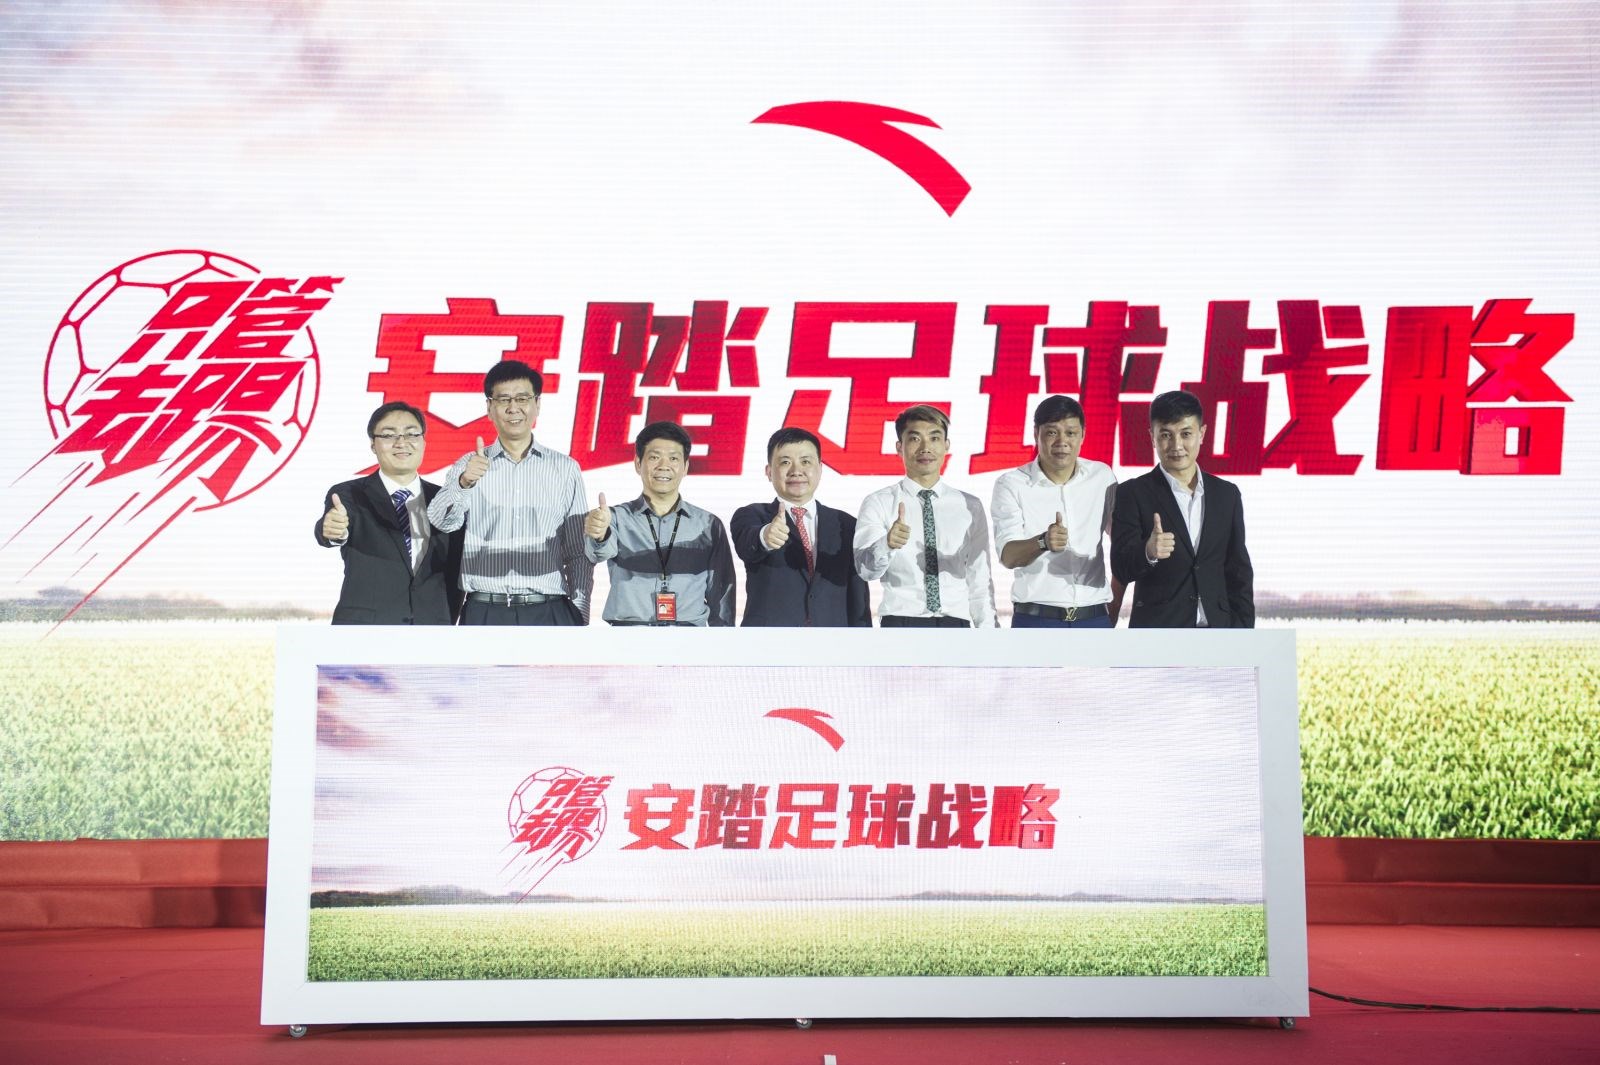 ANTA SPORTS UNVEILS SOCCER STRATEGY  FOUR KEY CAMPAIGNS TO PROMOTE SOCCER AMONG CHINA’S YOUTH